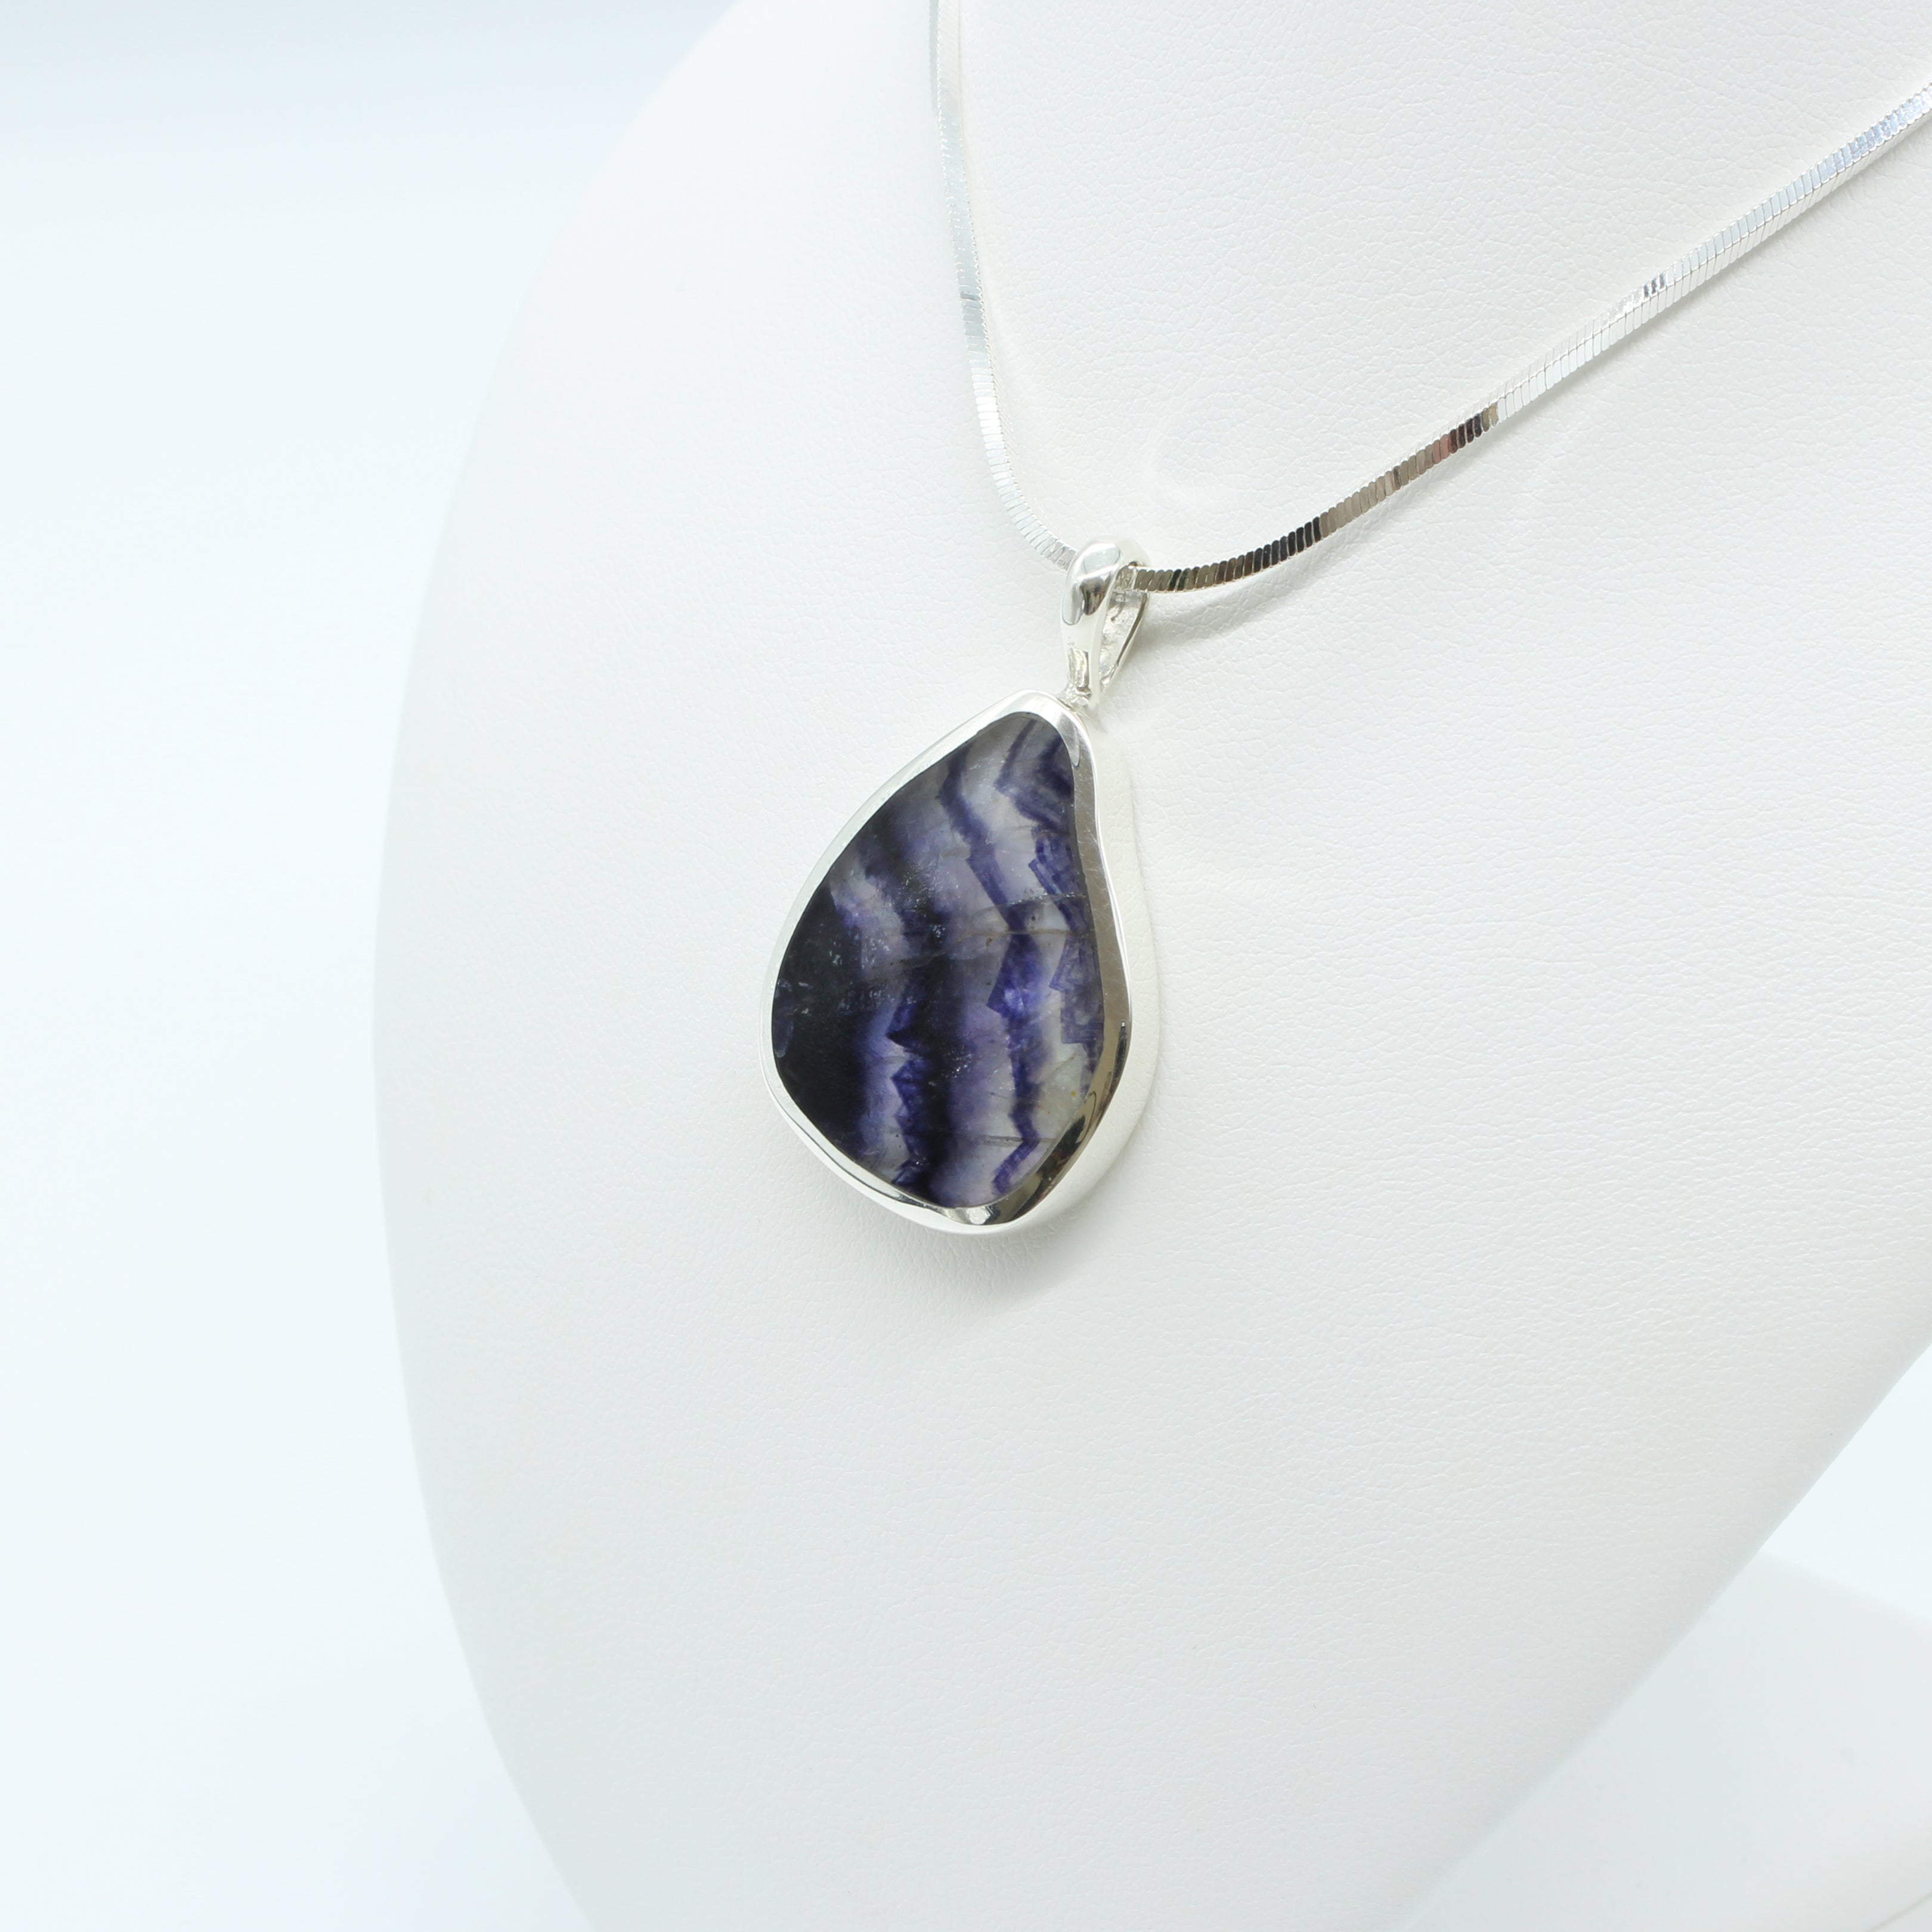 Buy Blue John Pendant Set in 925 Sterling Silver Necklace Online in India -  Etsy